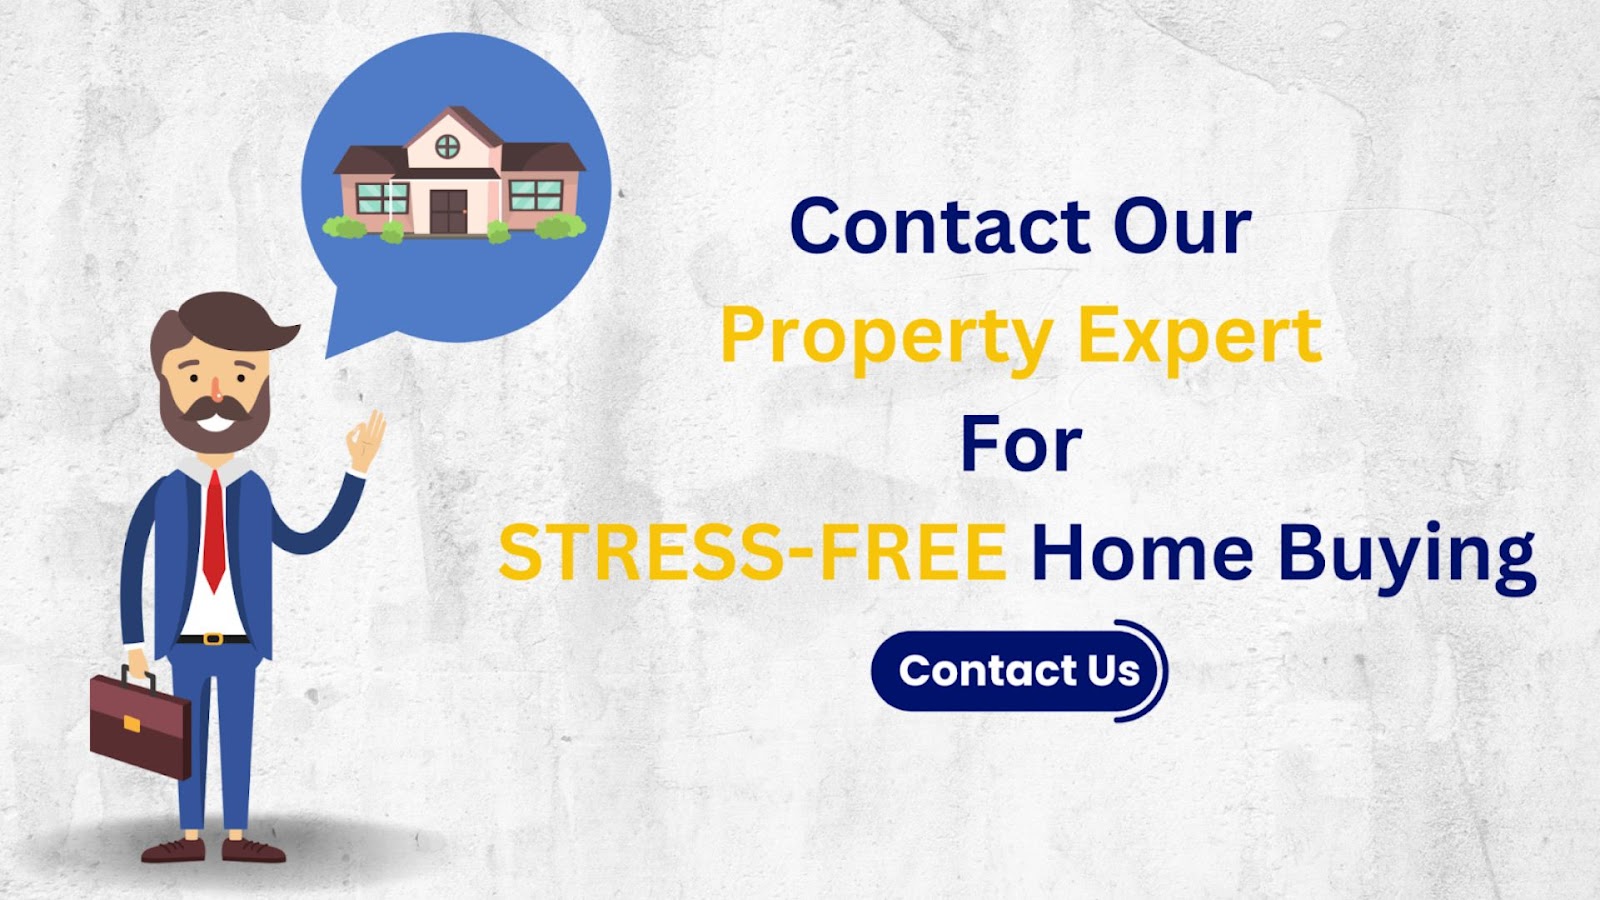 Contact PropertyCloud for the best guidance on residence certificates.